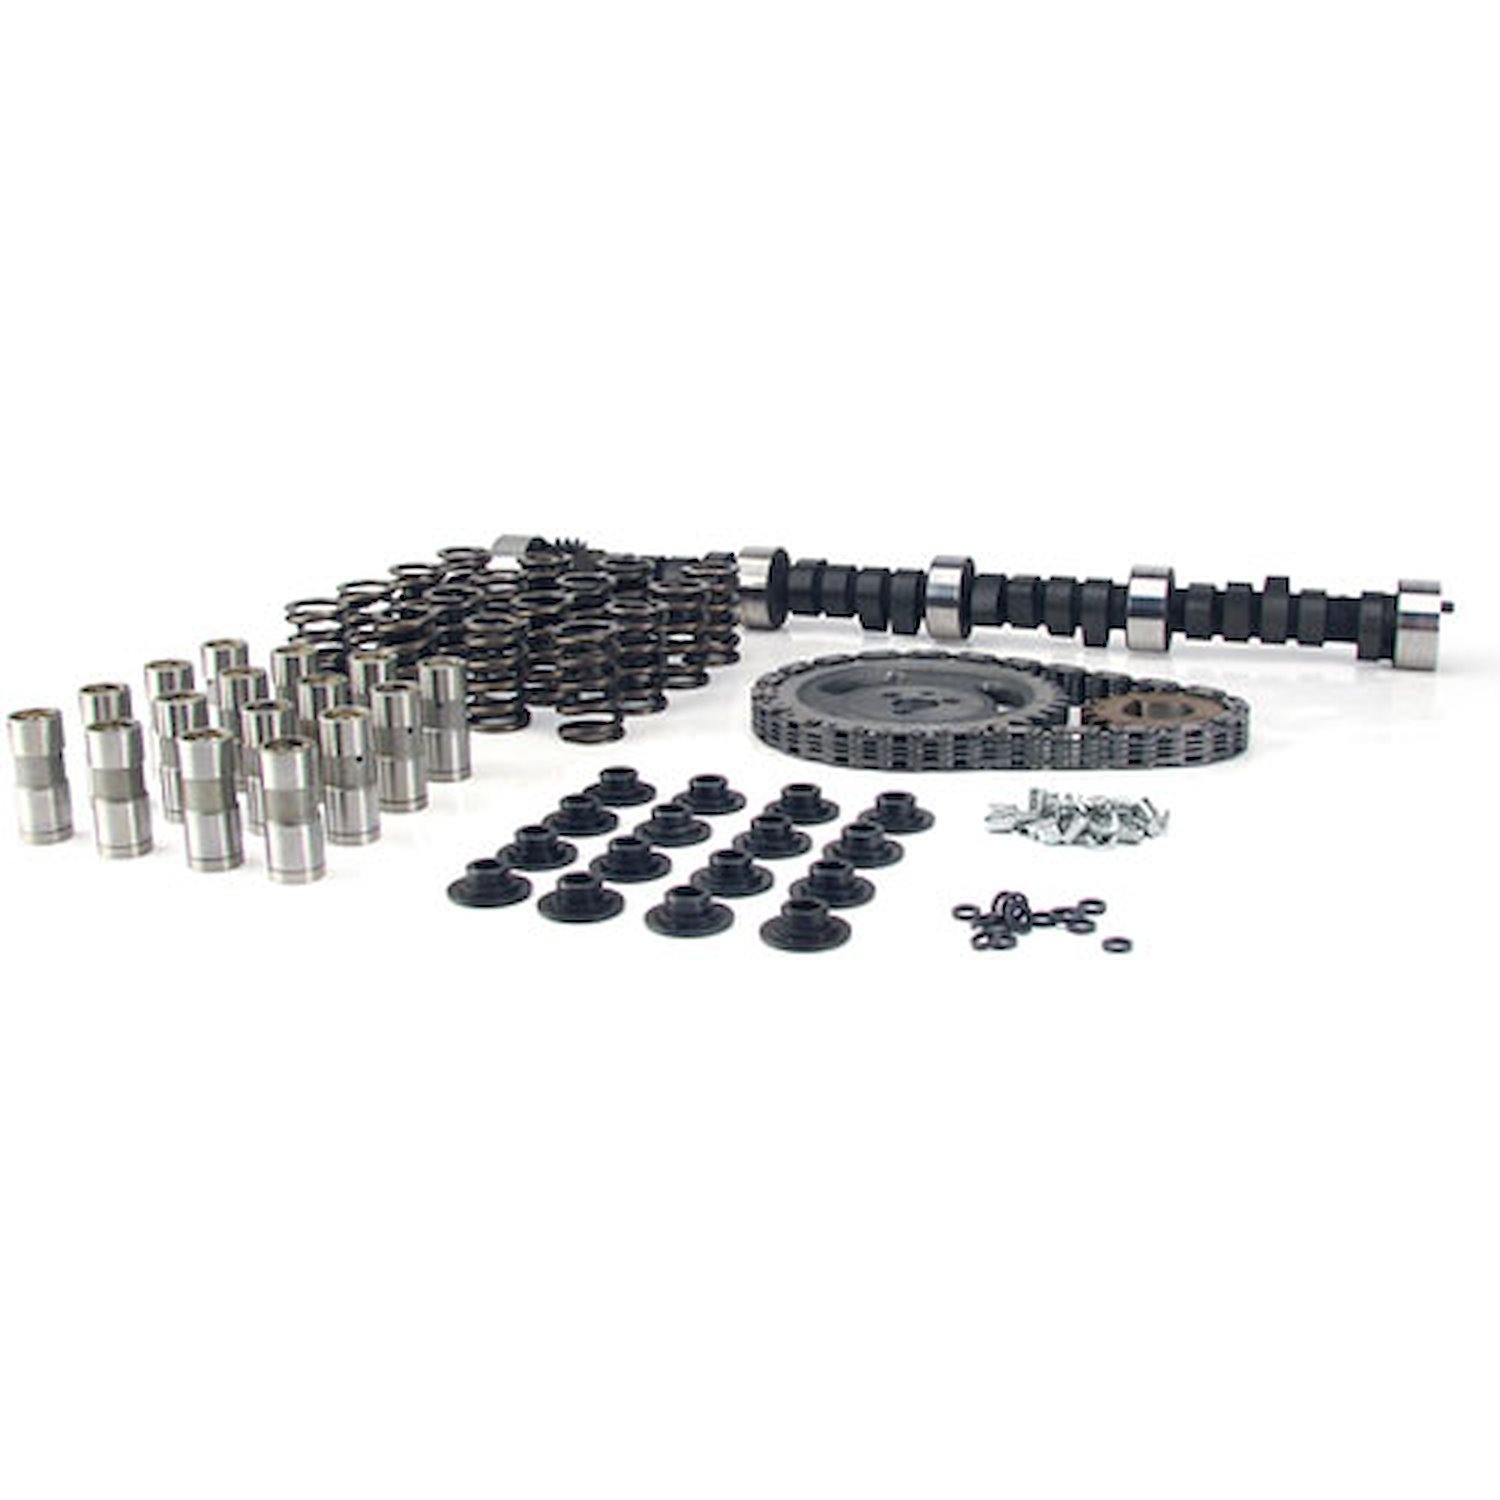 High Energy 252H Hydraulic Flat Tappet Camshaft Complete Kit Lift: .460"/.460" Duration: 252°/252° RPM Range: 800-4800